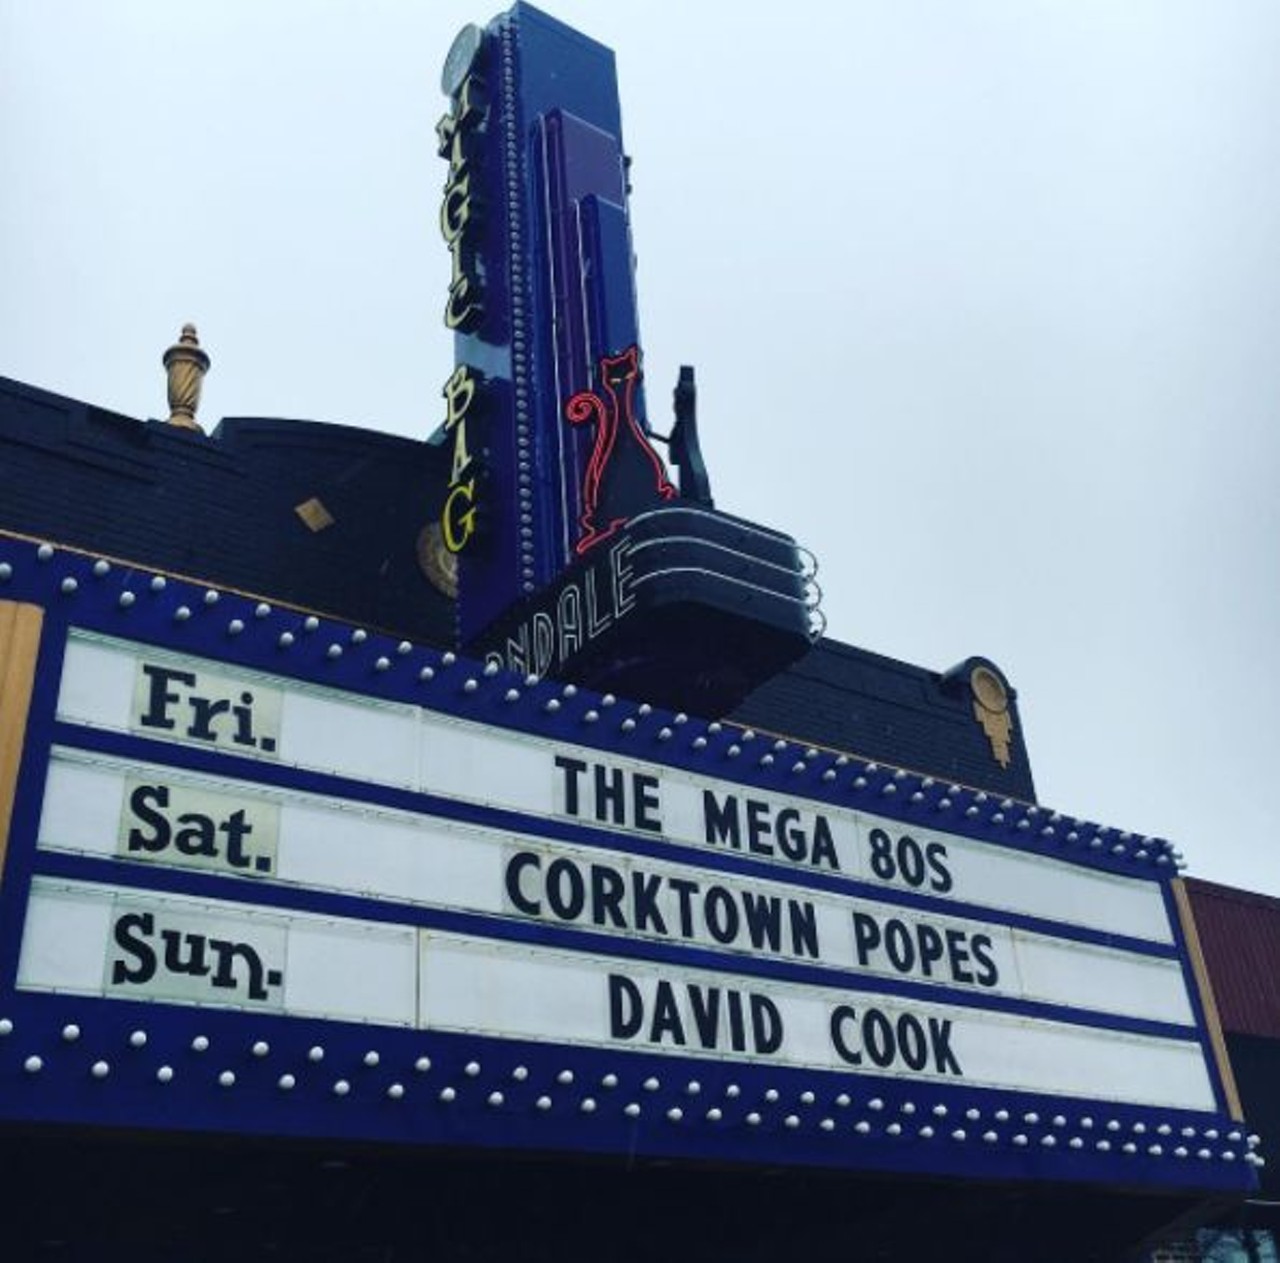 Go see a cover/tribute band
The Magic Bag in Ferndale has tons of cover/tribute bands all the time. Rock out to some guy who lives his life looking like Bruce Springsteen and save a $100 on a ticket.&nbsp;Photo via IG user @davidcookeofficial.